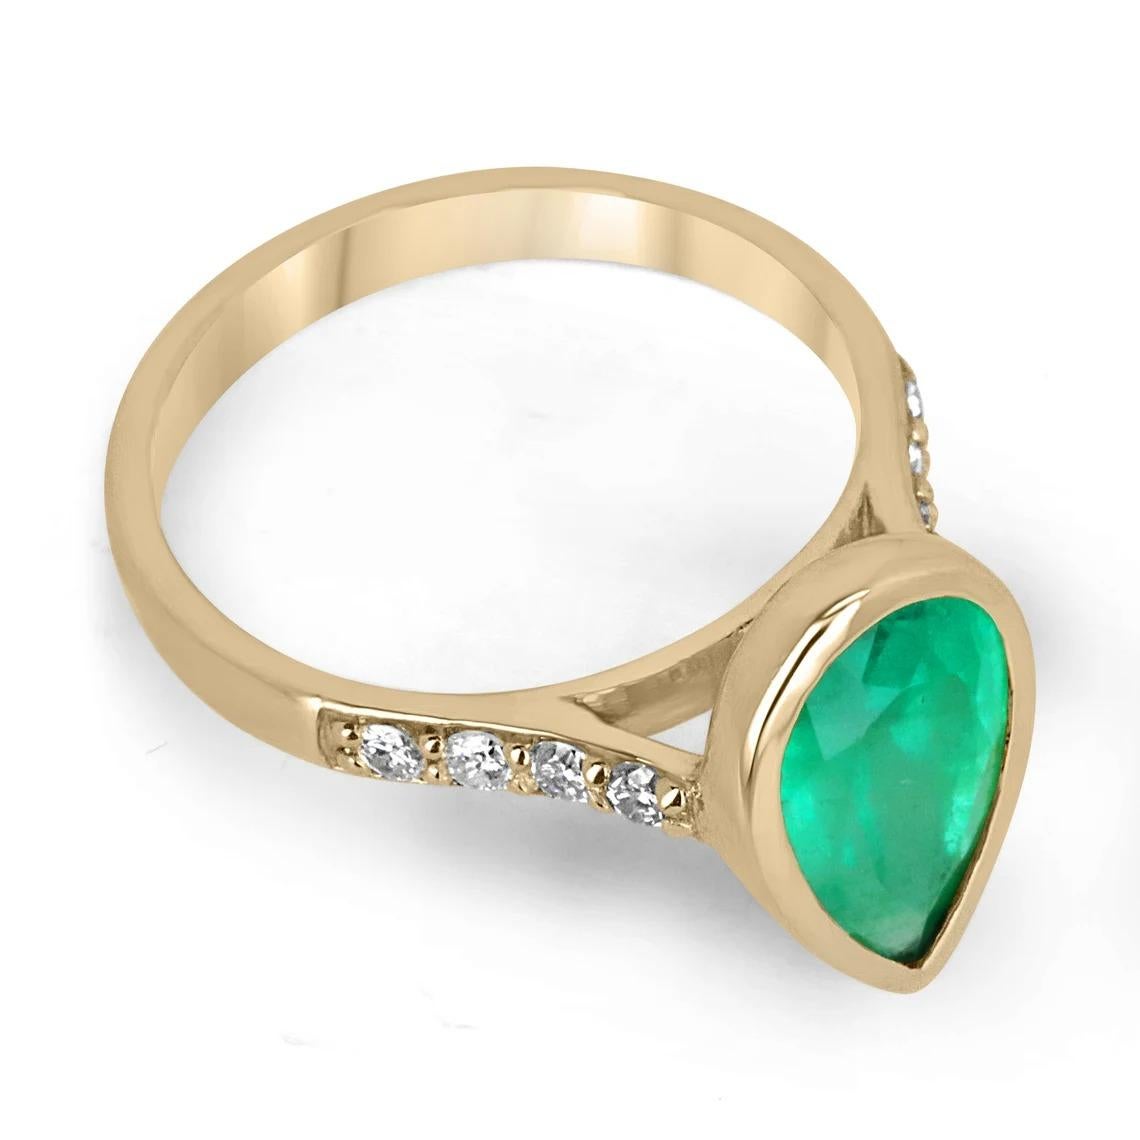 Displayed is a bezel pear emerald and diamond solitaire engagement ring/right-hand ring in 18K yellow gold. This gorgeous solitaire ring carries a full 3.16-carat emerald in a bezel setting which adds extra protection for the stone. Fully faceted,